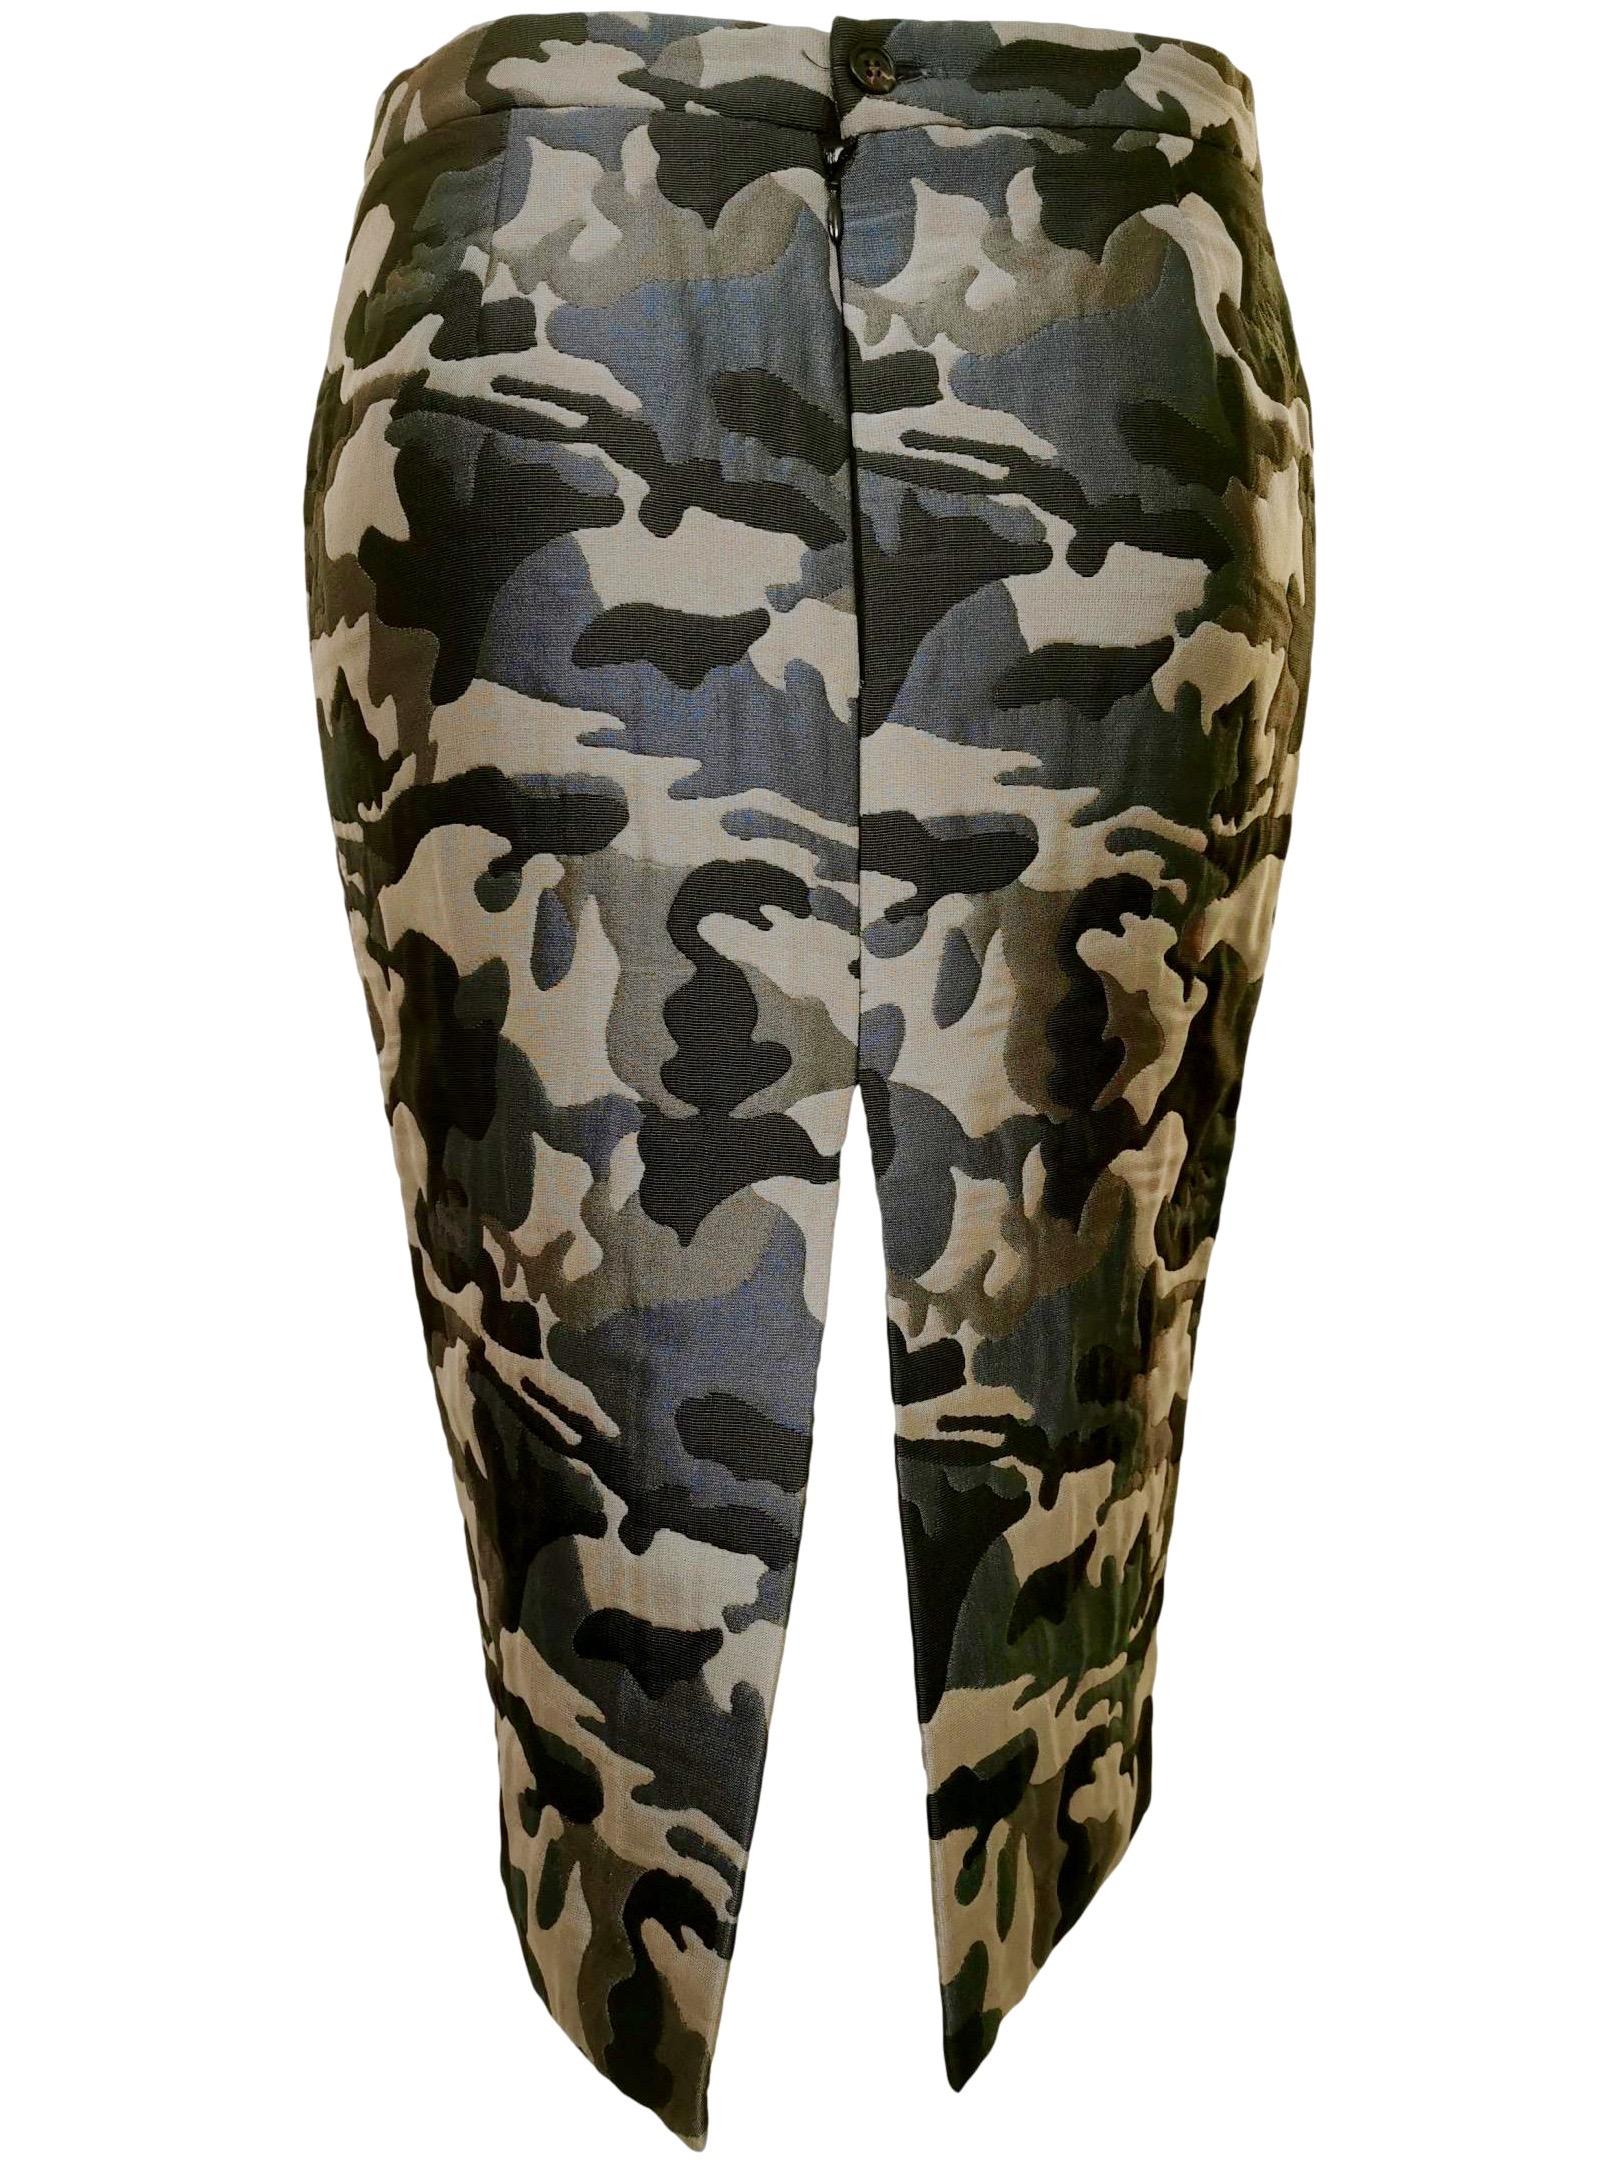 Alexander McQueen Vintage 1990's Quilted Camouflage Fitted Skirt  For Sale 6